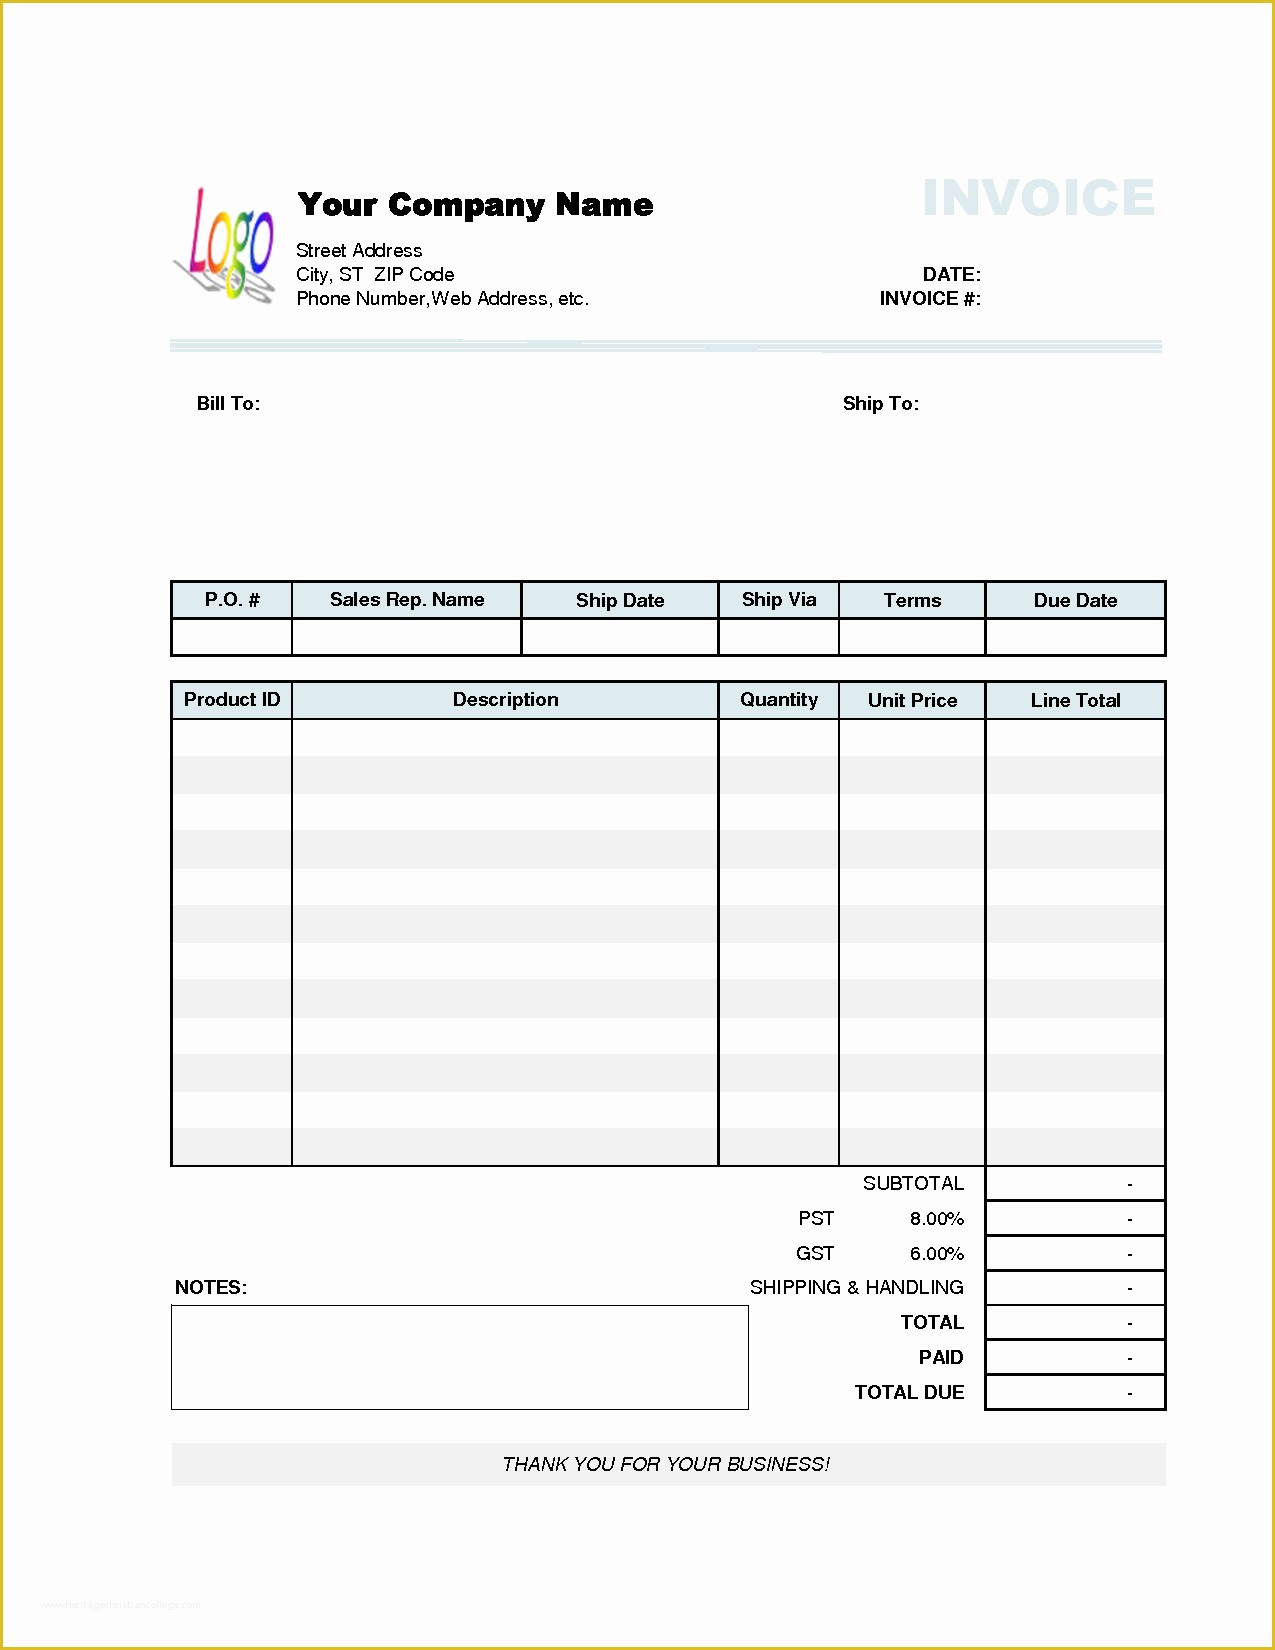 Free Invoice Template for Word 2010 Of Invoice Template Excel 2010